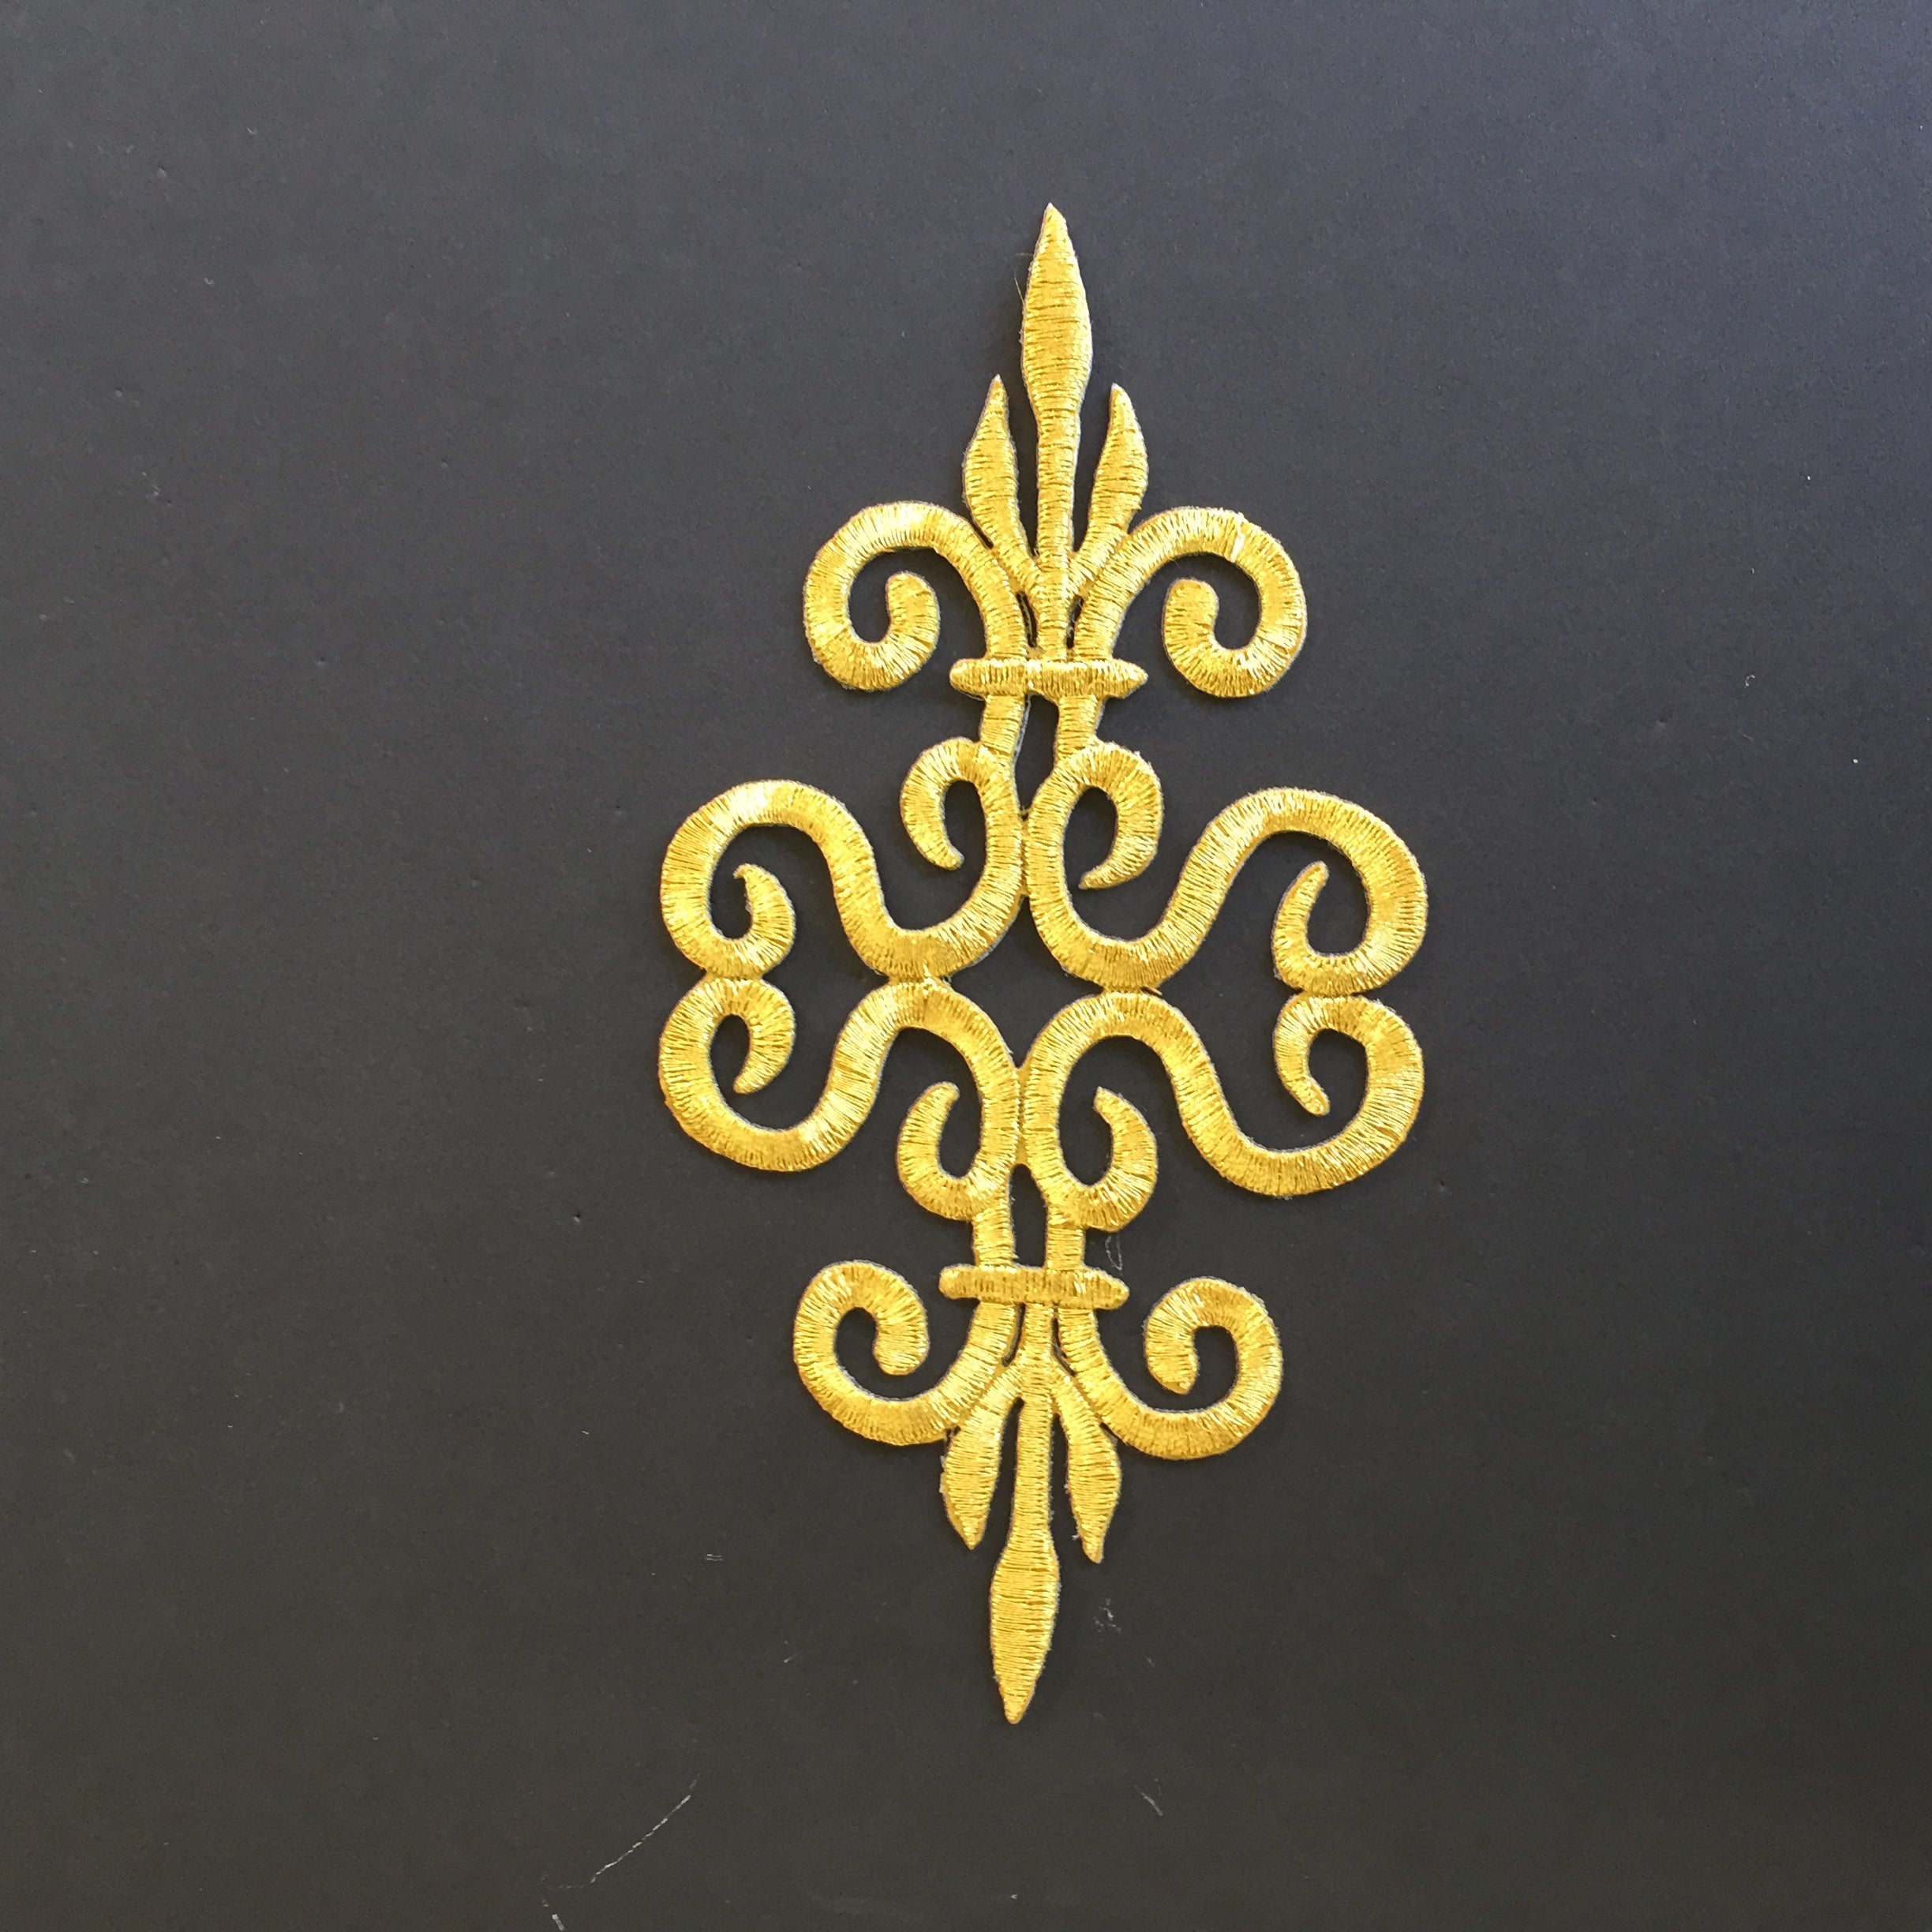 Gold cosplay iron-on patch is embroidered with gold metallic thread.